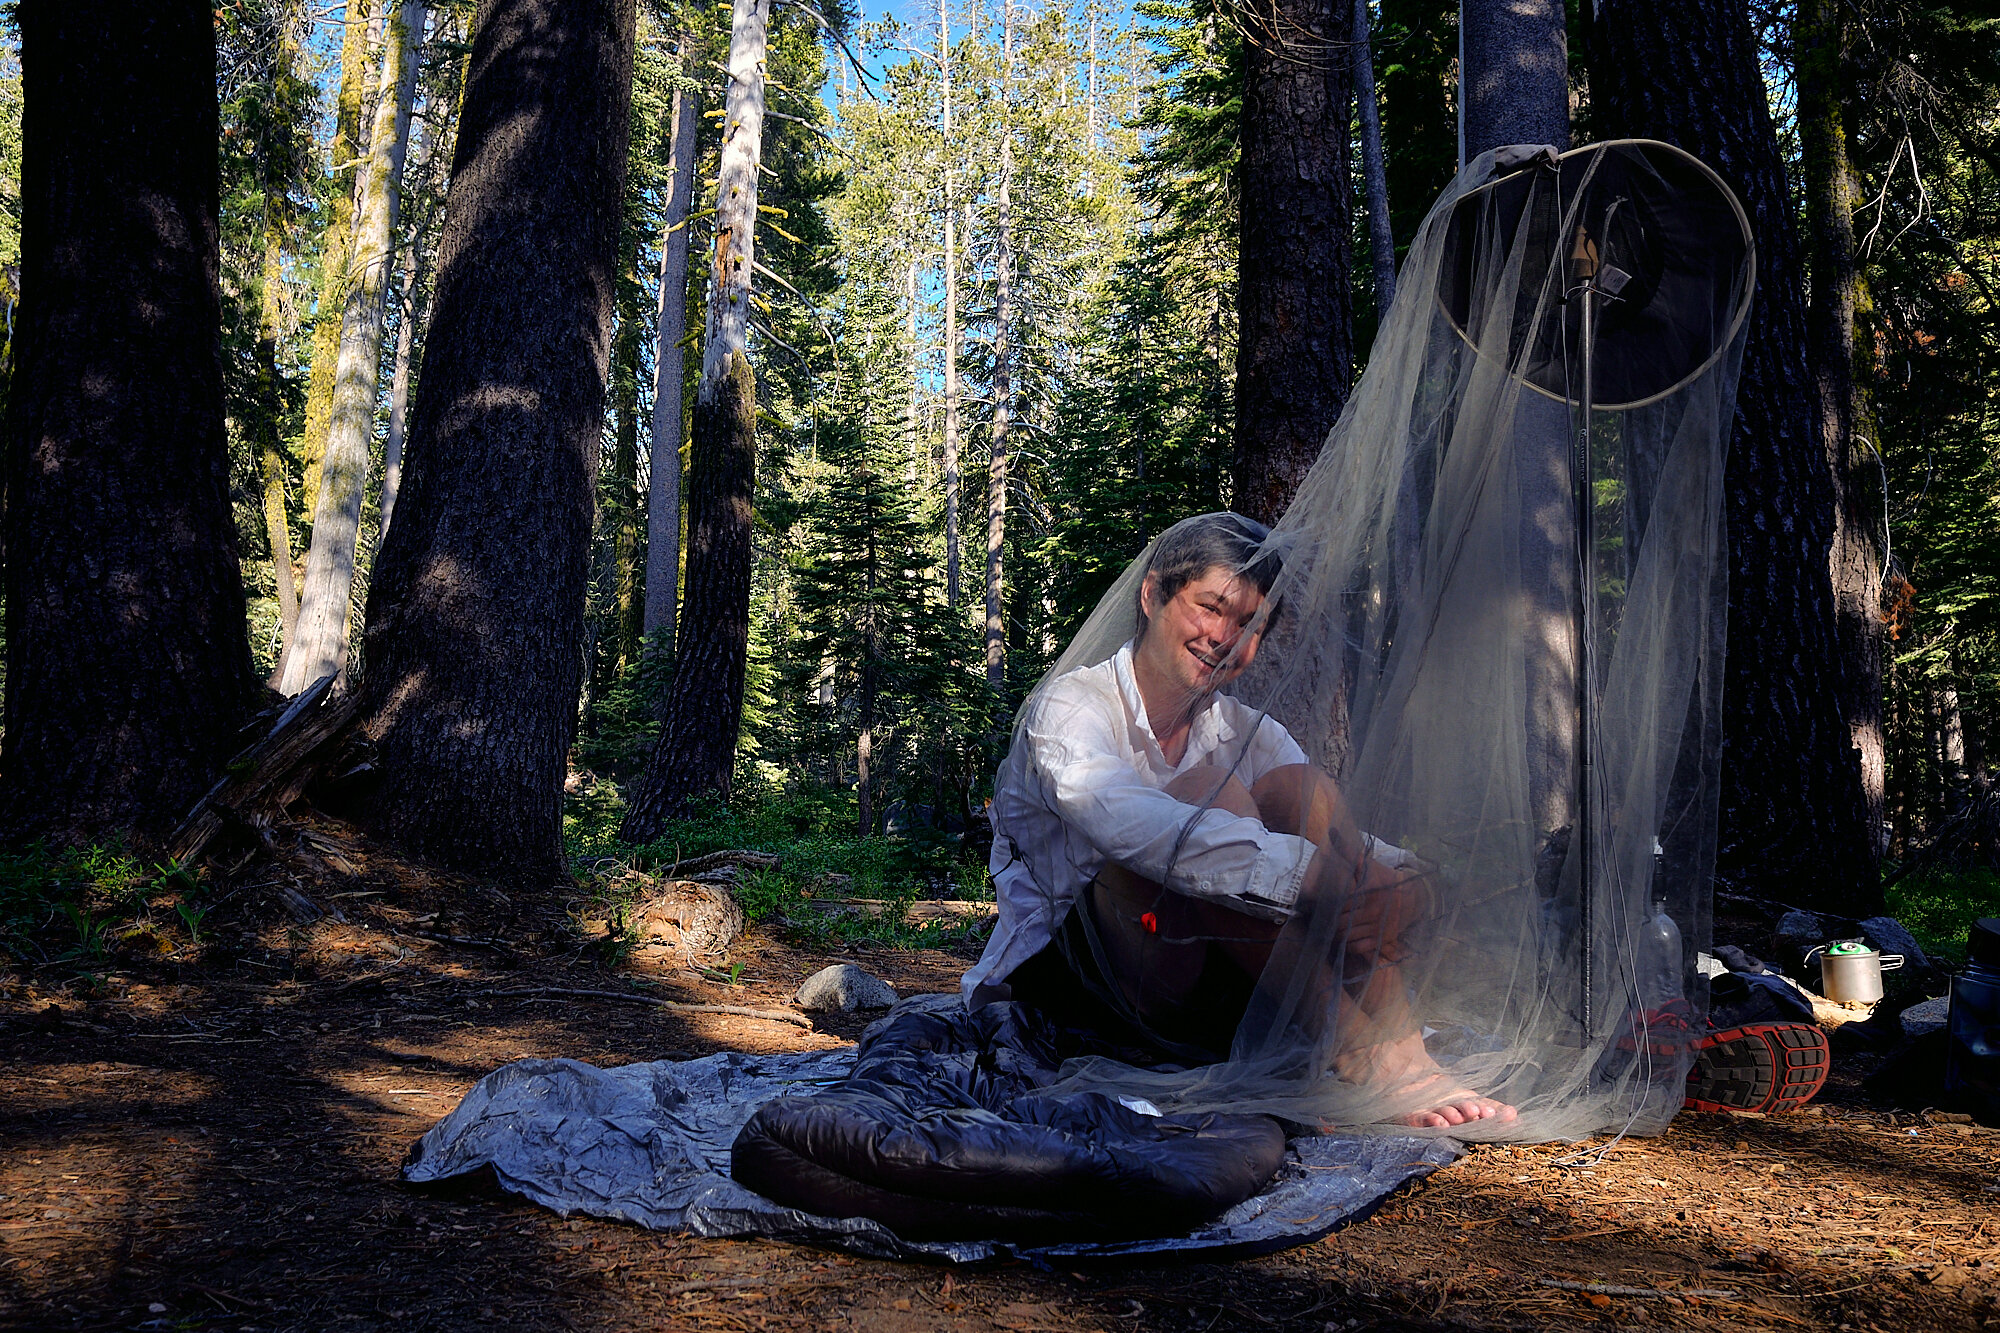  Blade attempts to outsmart the mosquitos with a makeshift net in Desolation Wilderness west of Lake Tahoe. | 7/19/19 Mile 1,122.1, 6,973' 